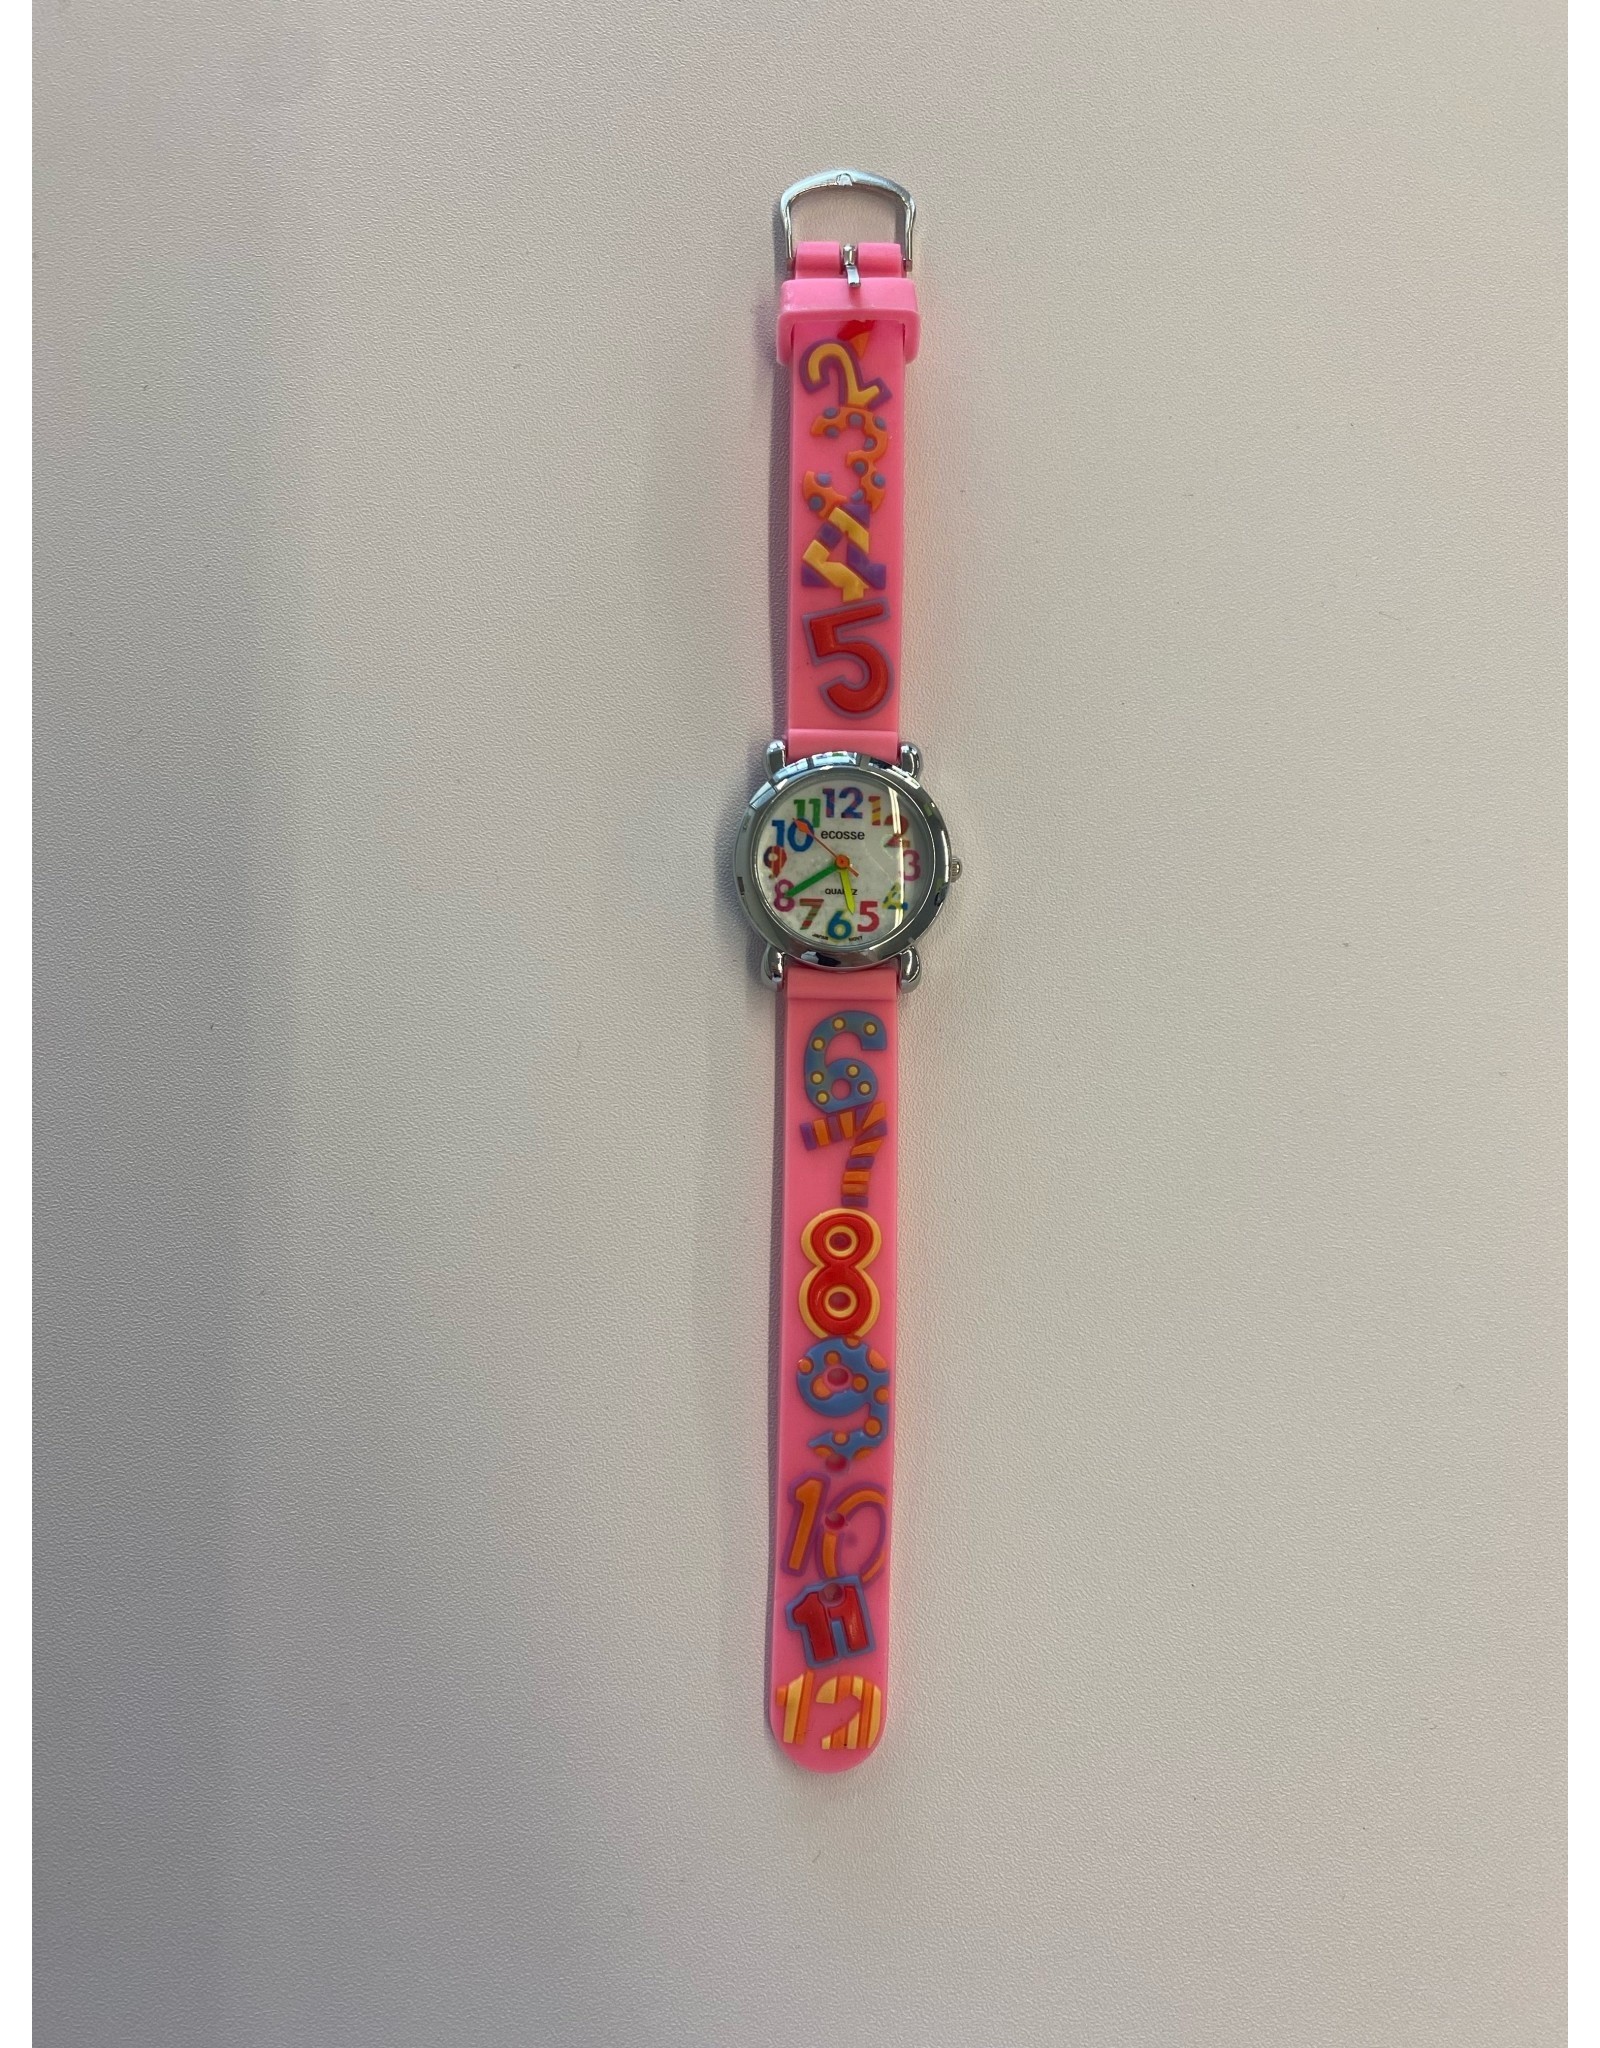 Children's Female Watch Hot Pink with Numbers